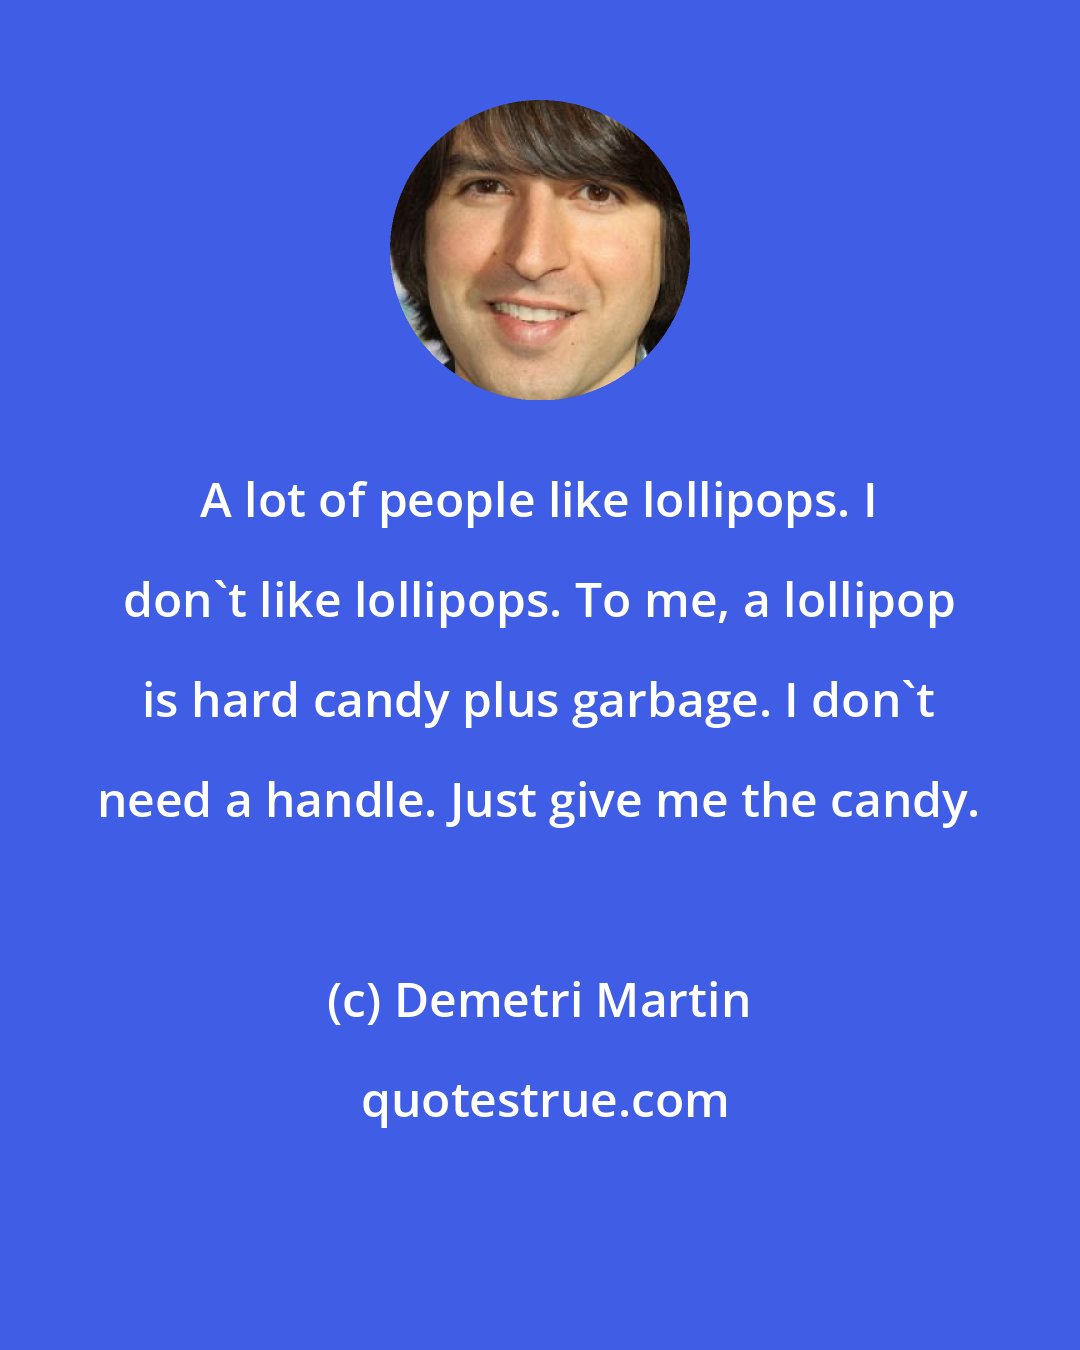 Demetri Martin: A lot of people like lollipops. I don't like lollipops. To me, a lollipop is hard candy plus garbage. I don't need a handle. Just give me the candy.